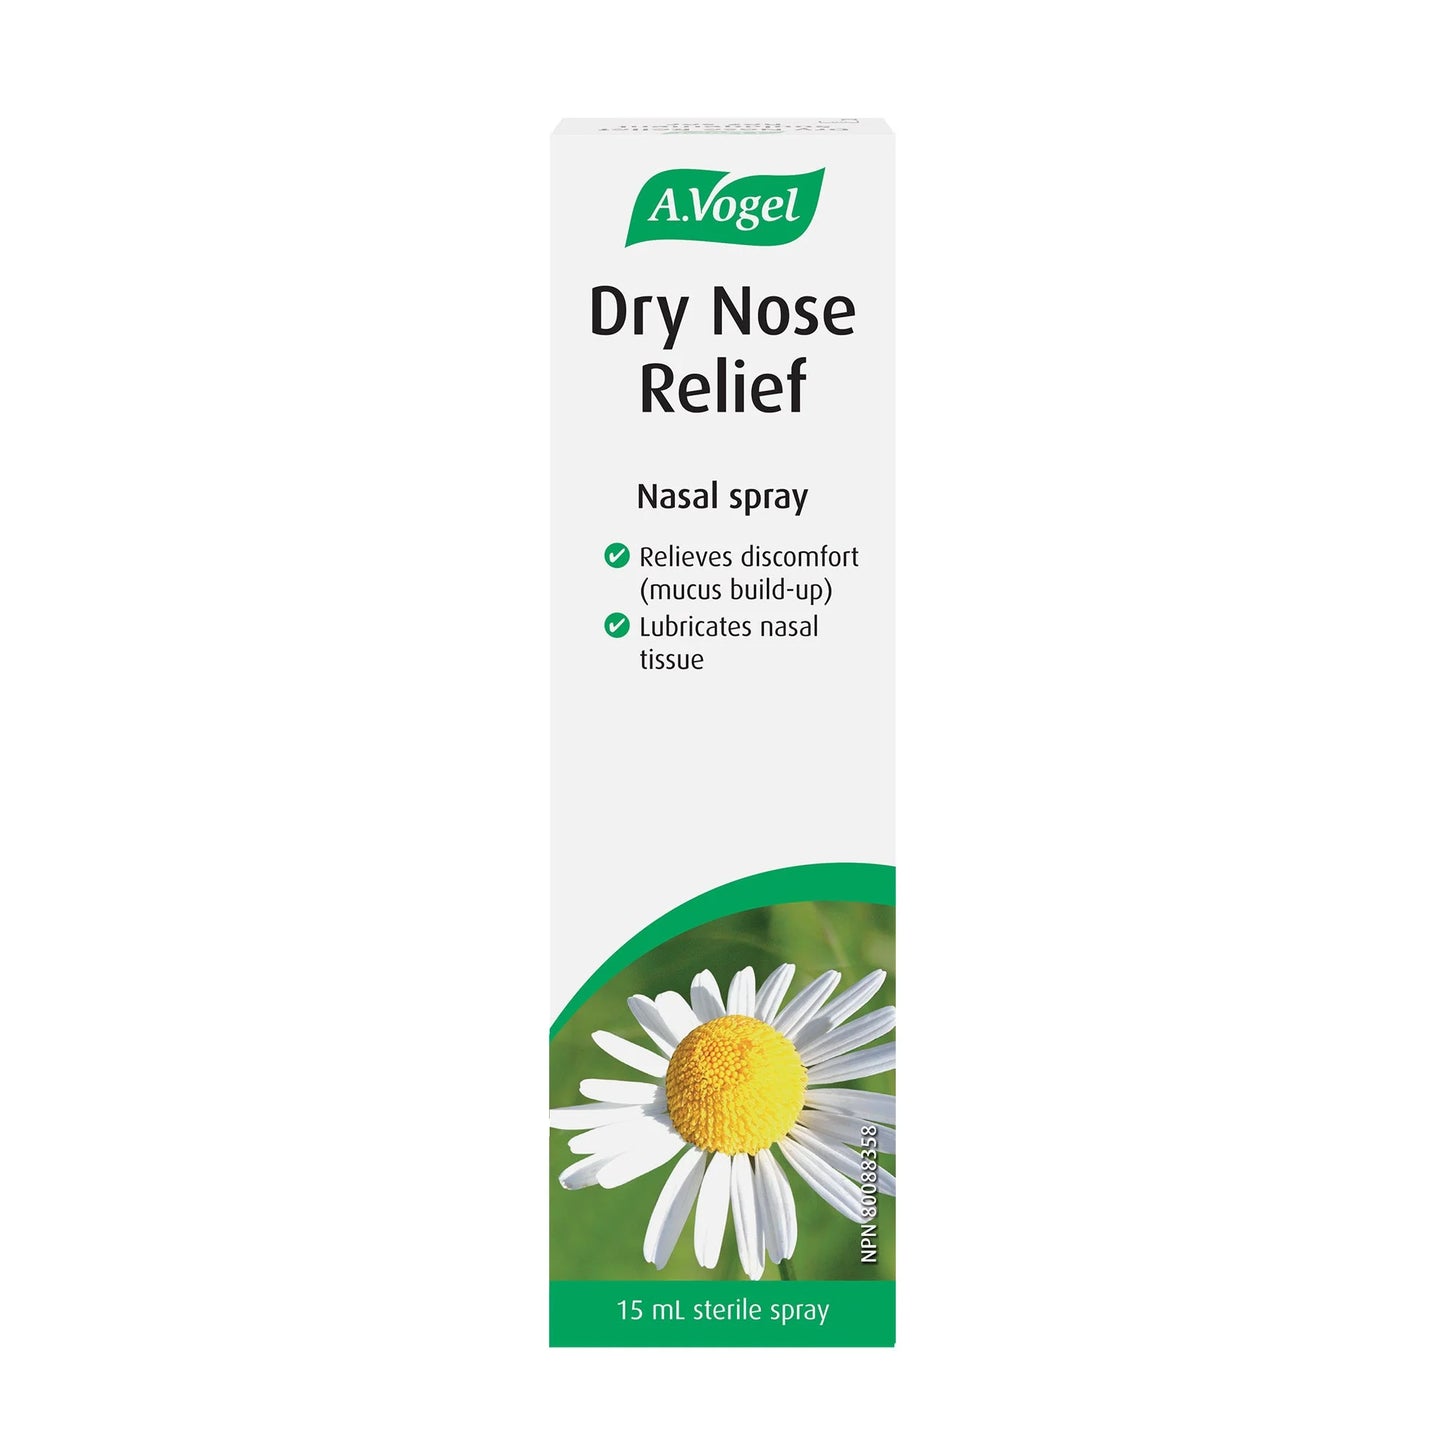 DRY NOSE RELIEF 15ML A.VOGEL